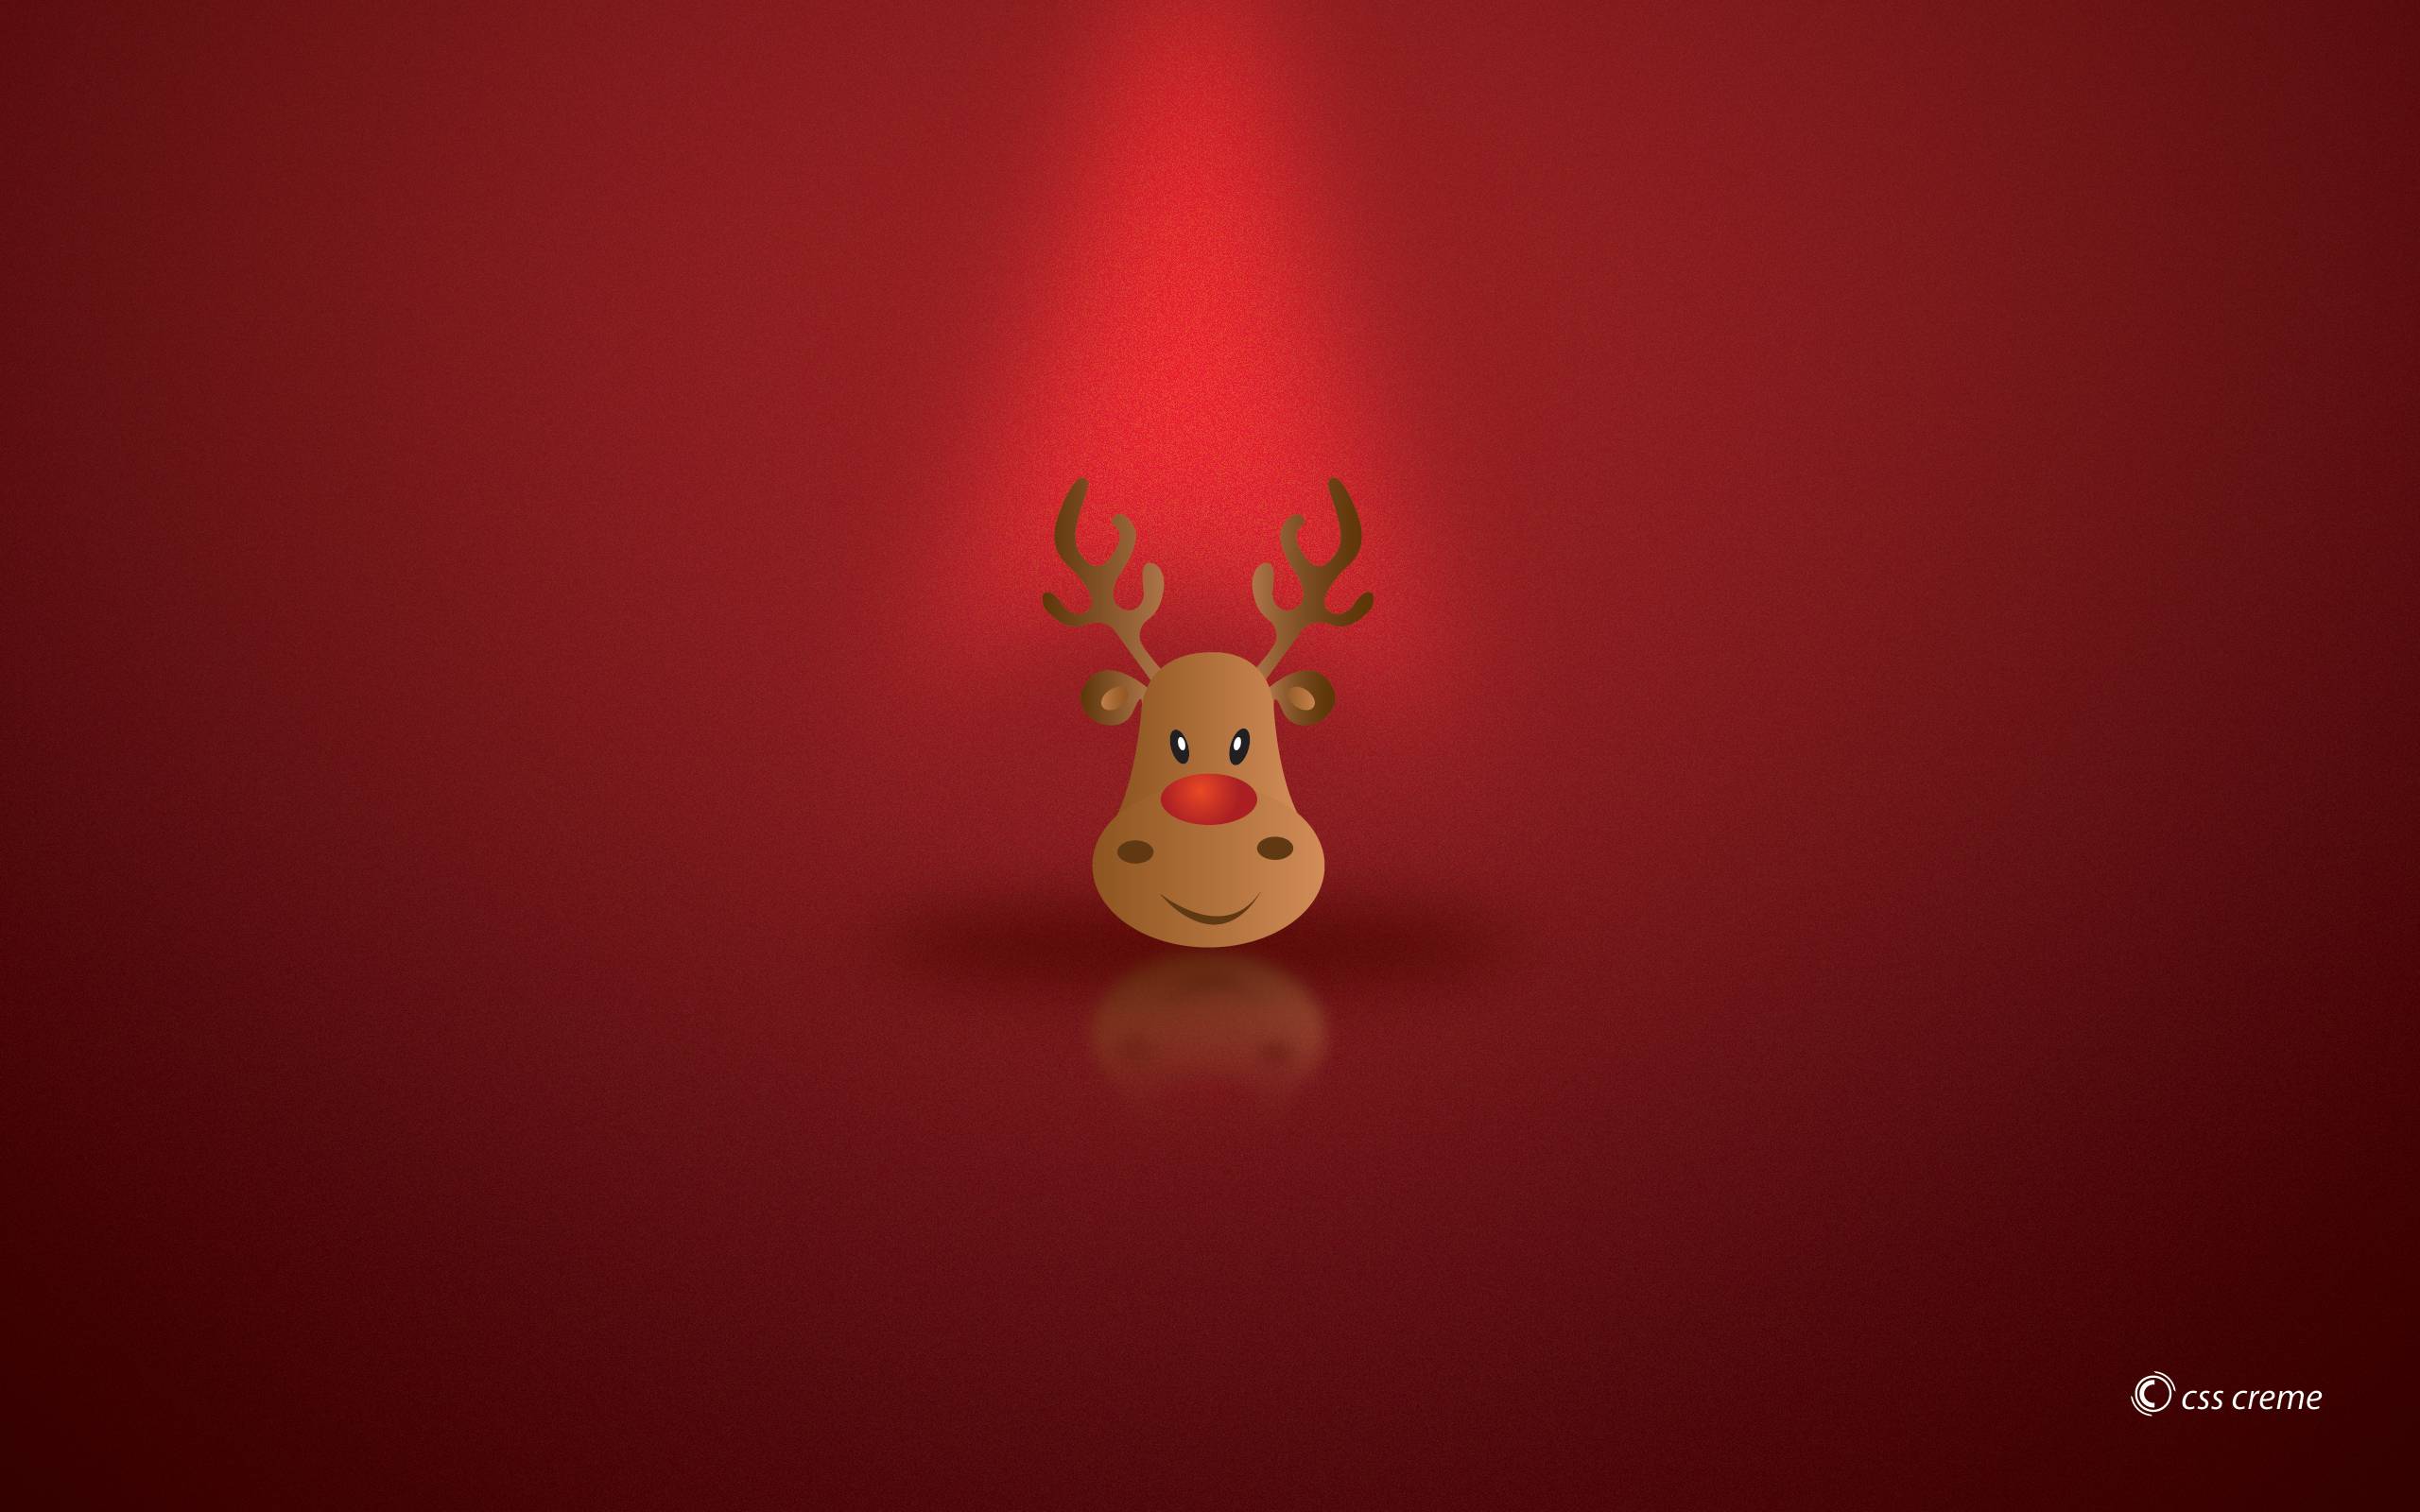 HD wallpaper Stuffed Rudolph the Red Nosed Reindeer Christmas photos  public domain  Wallpaper Flare